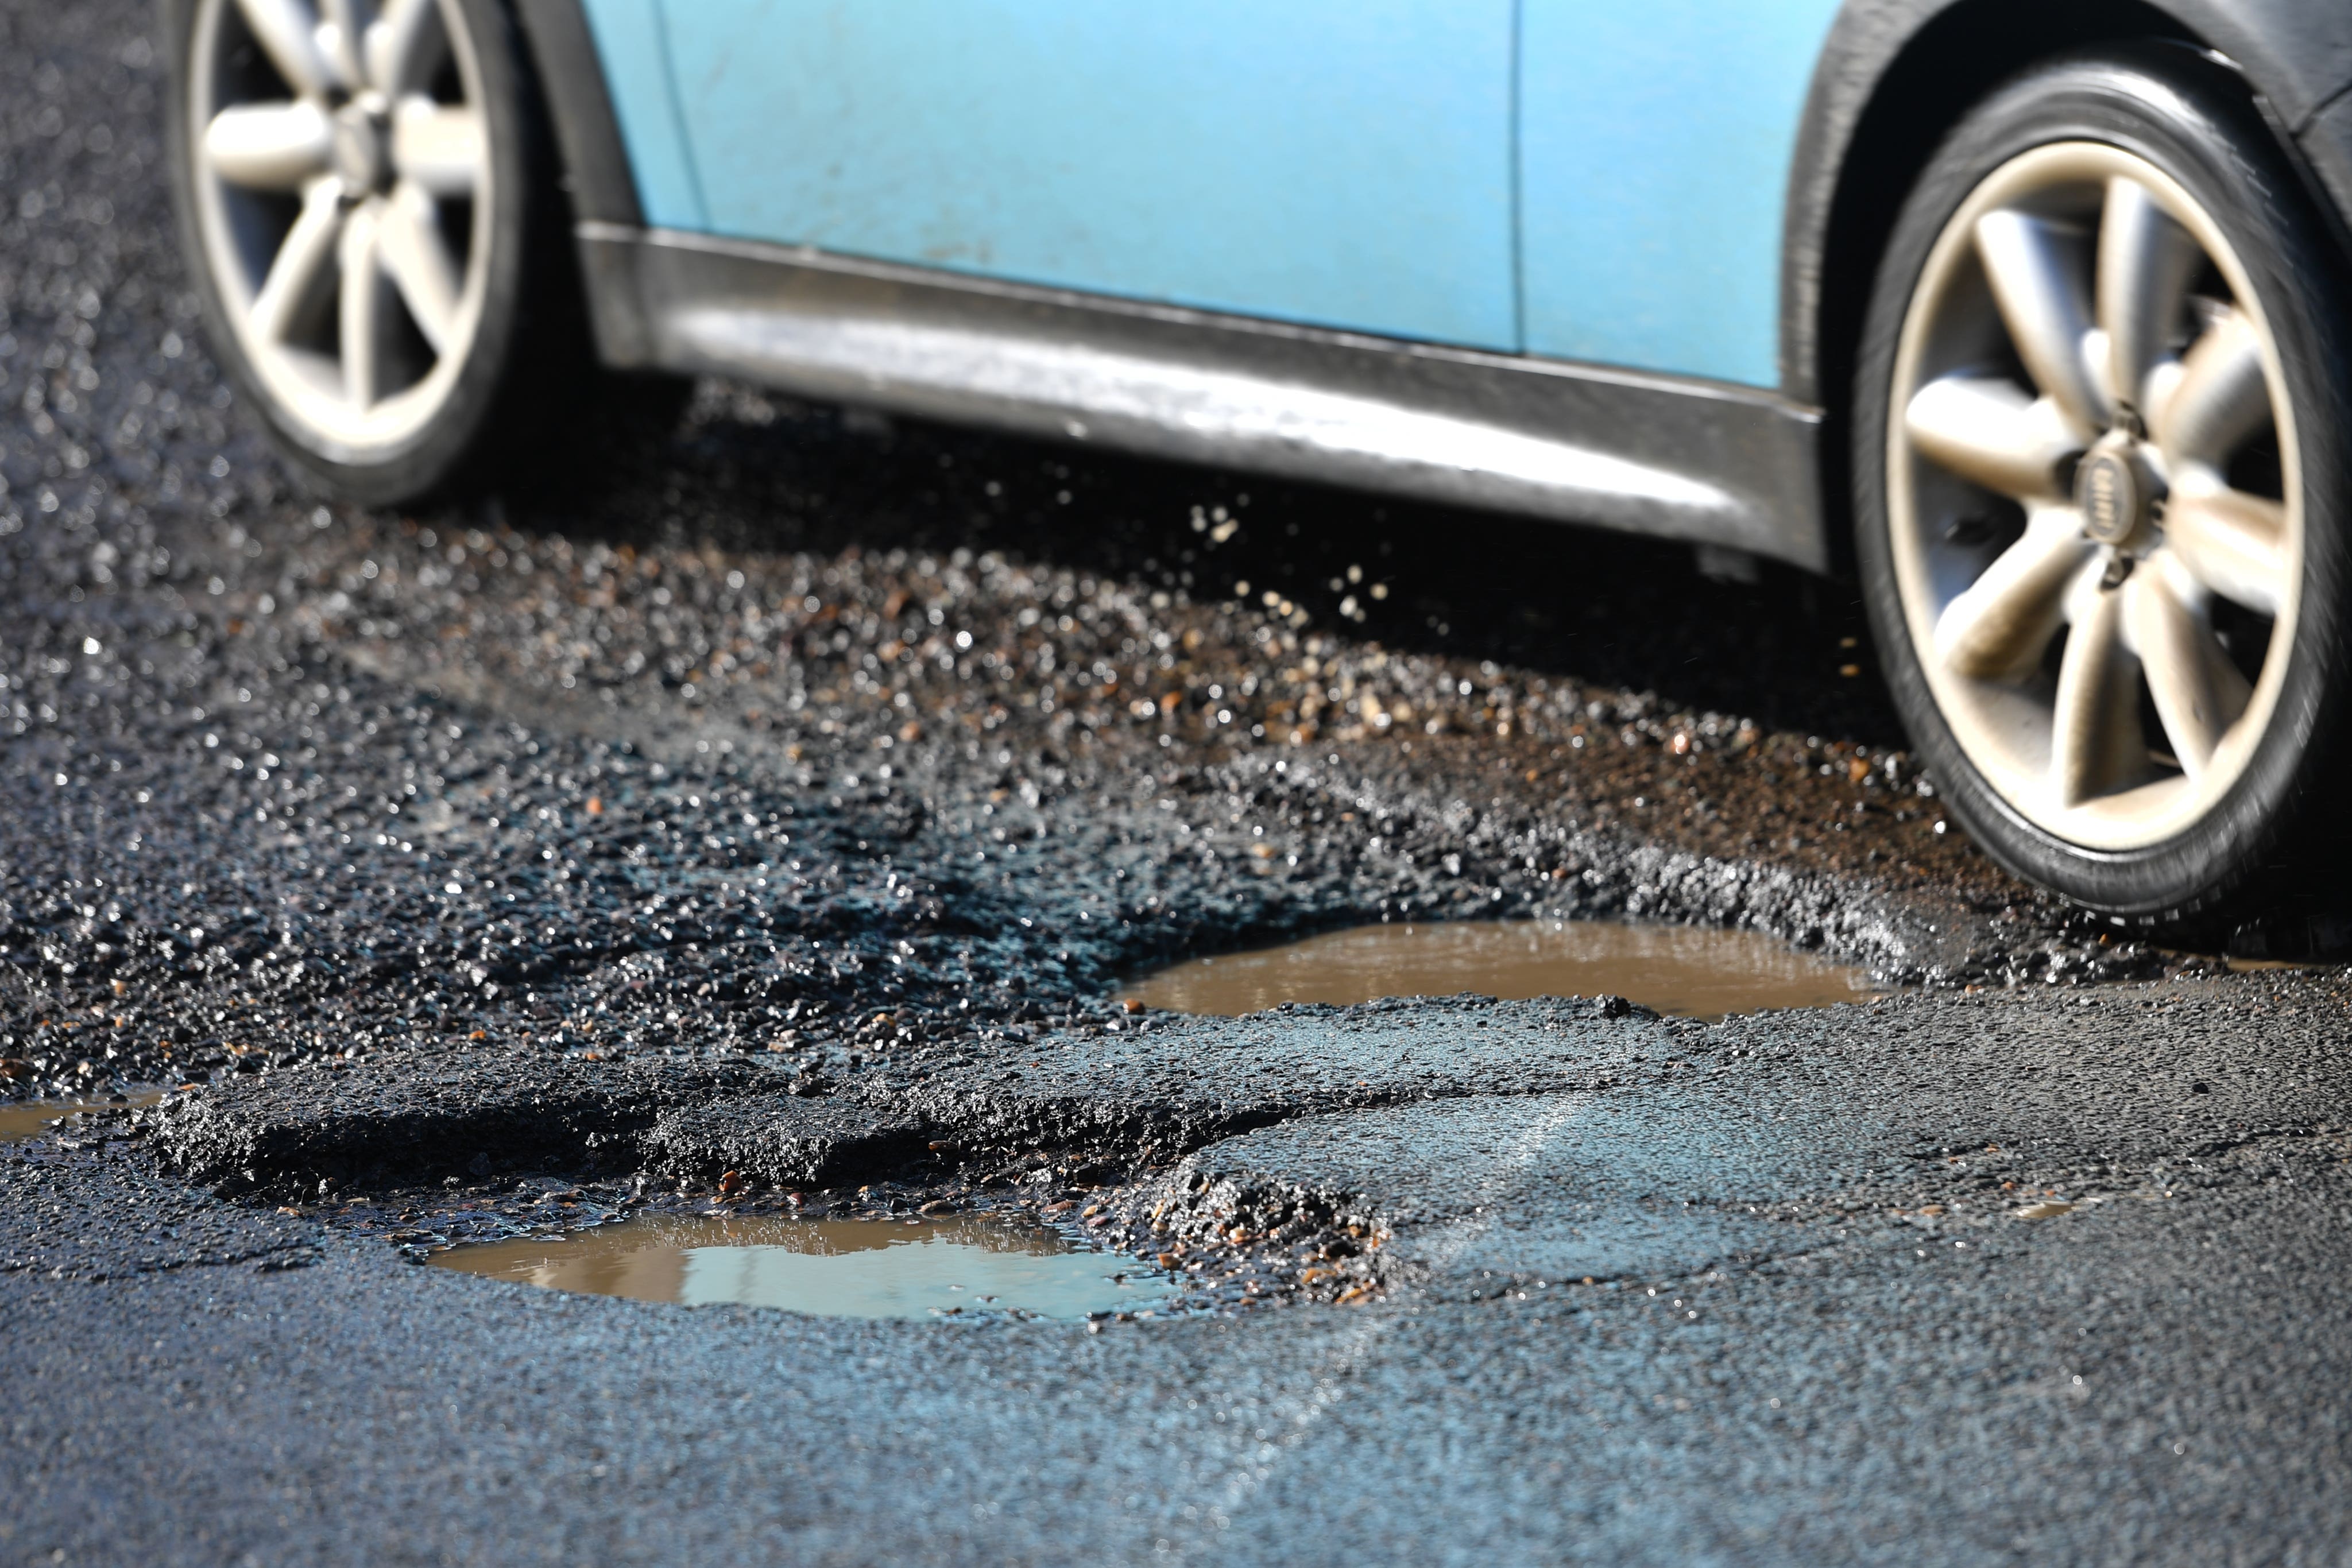 The number of vehicle breakdowns caused by potholes increased by 9 per cent in the past 12 months, new figures indicate